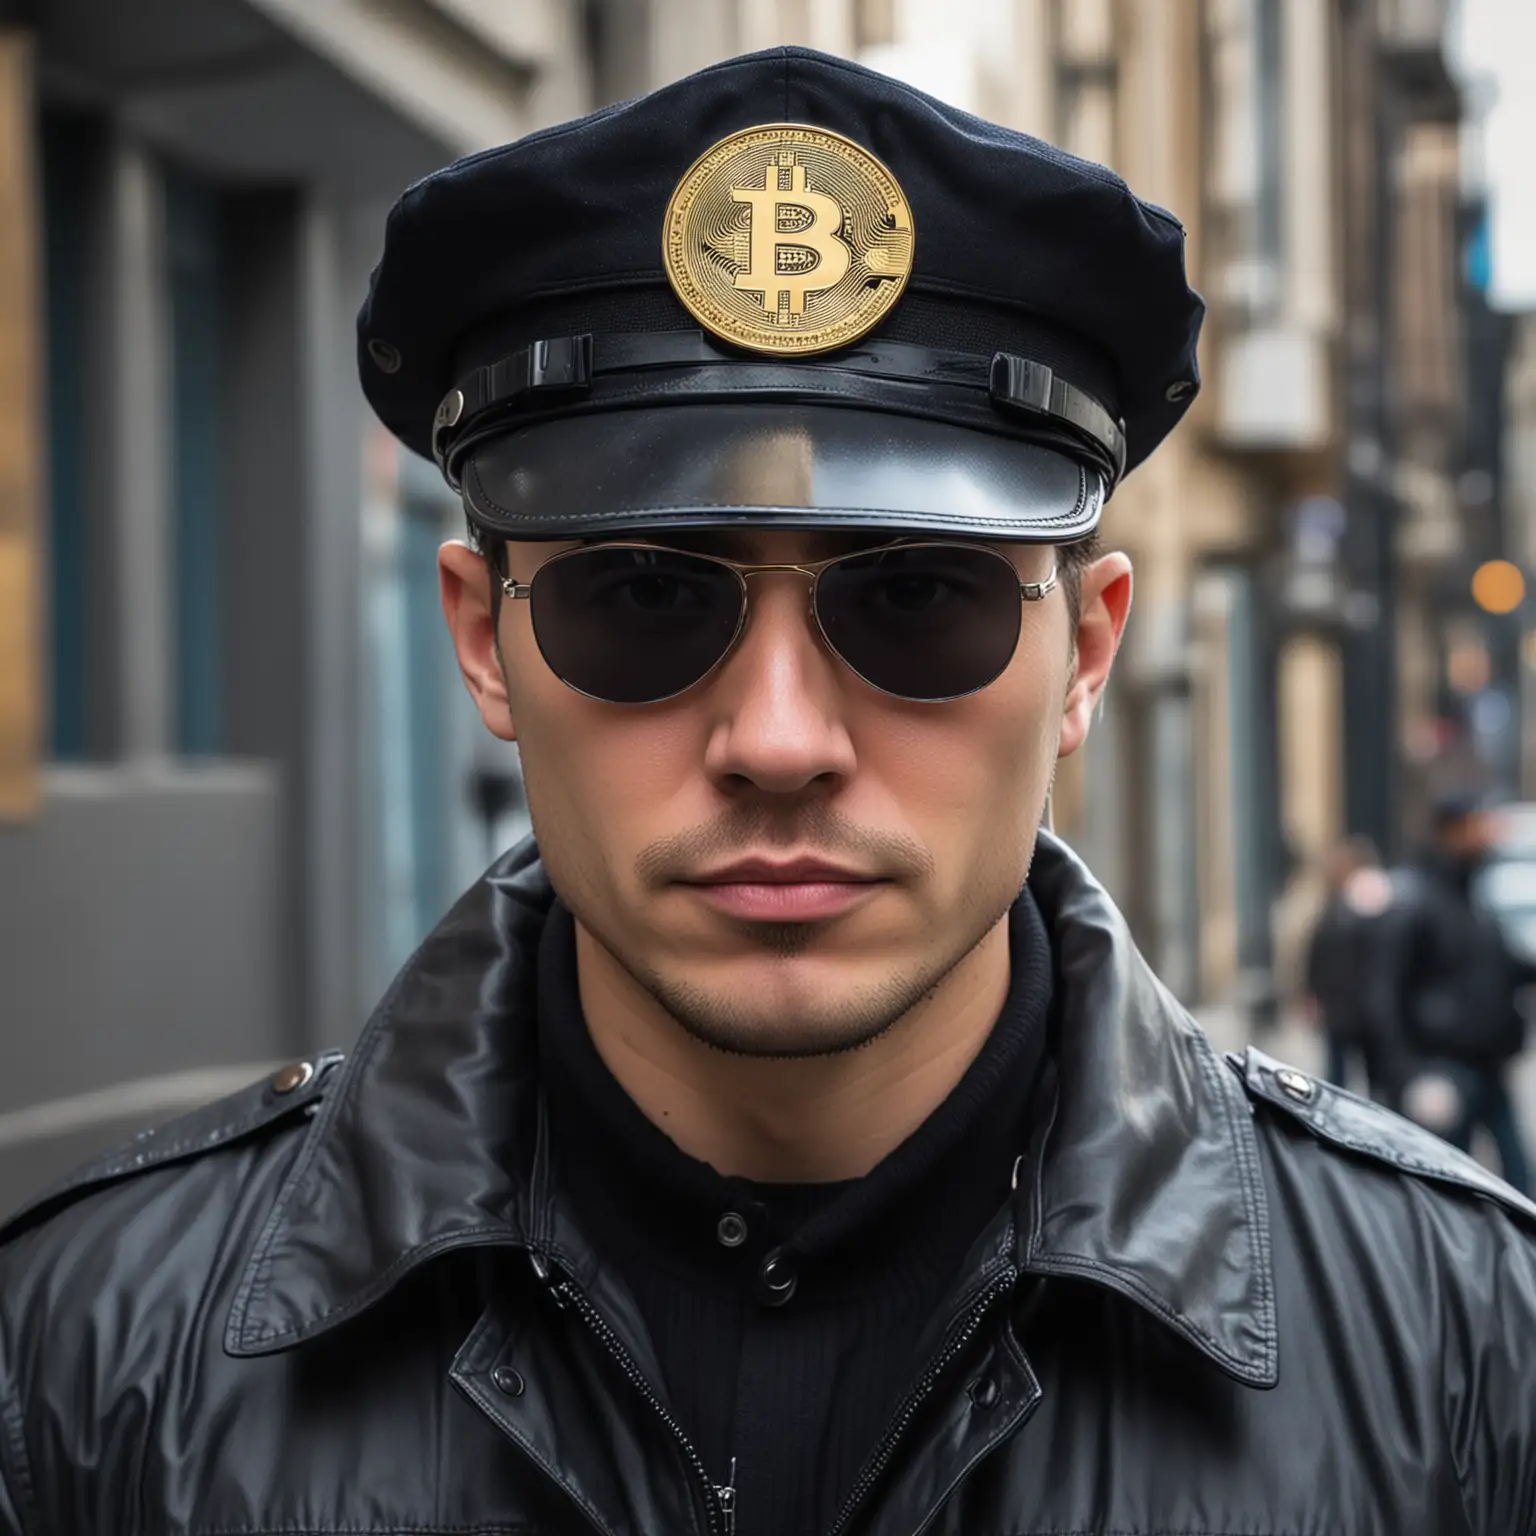 Private Investigator Tracking Cryptocurrency Scammers with Police